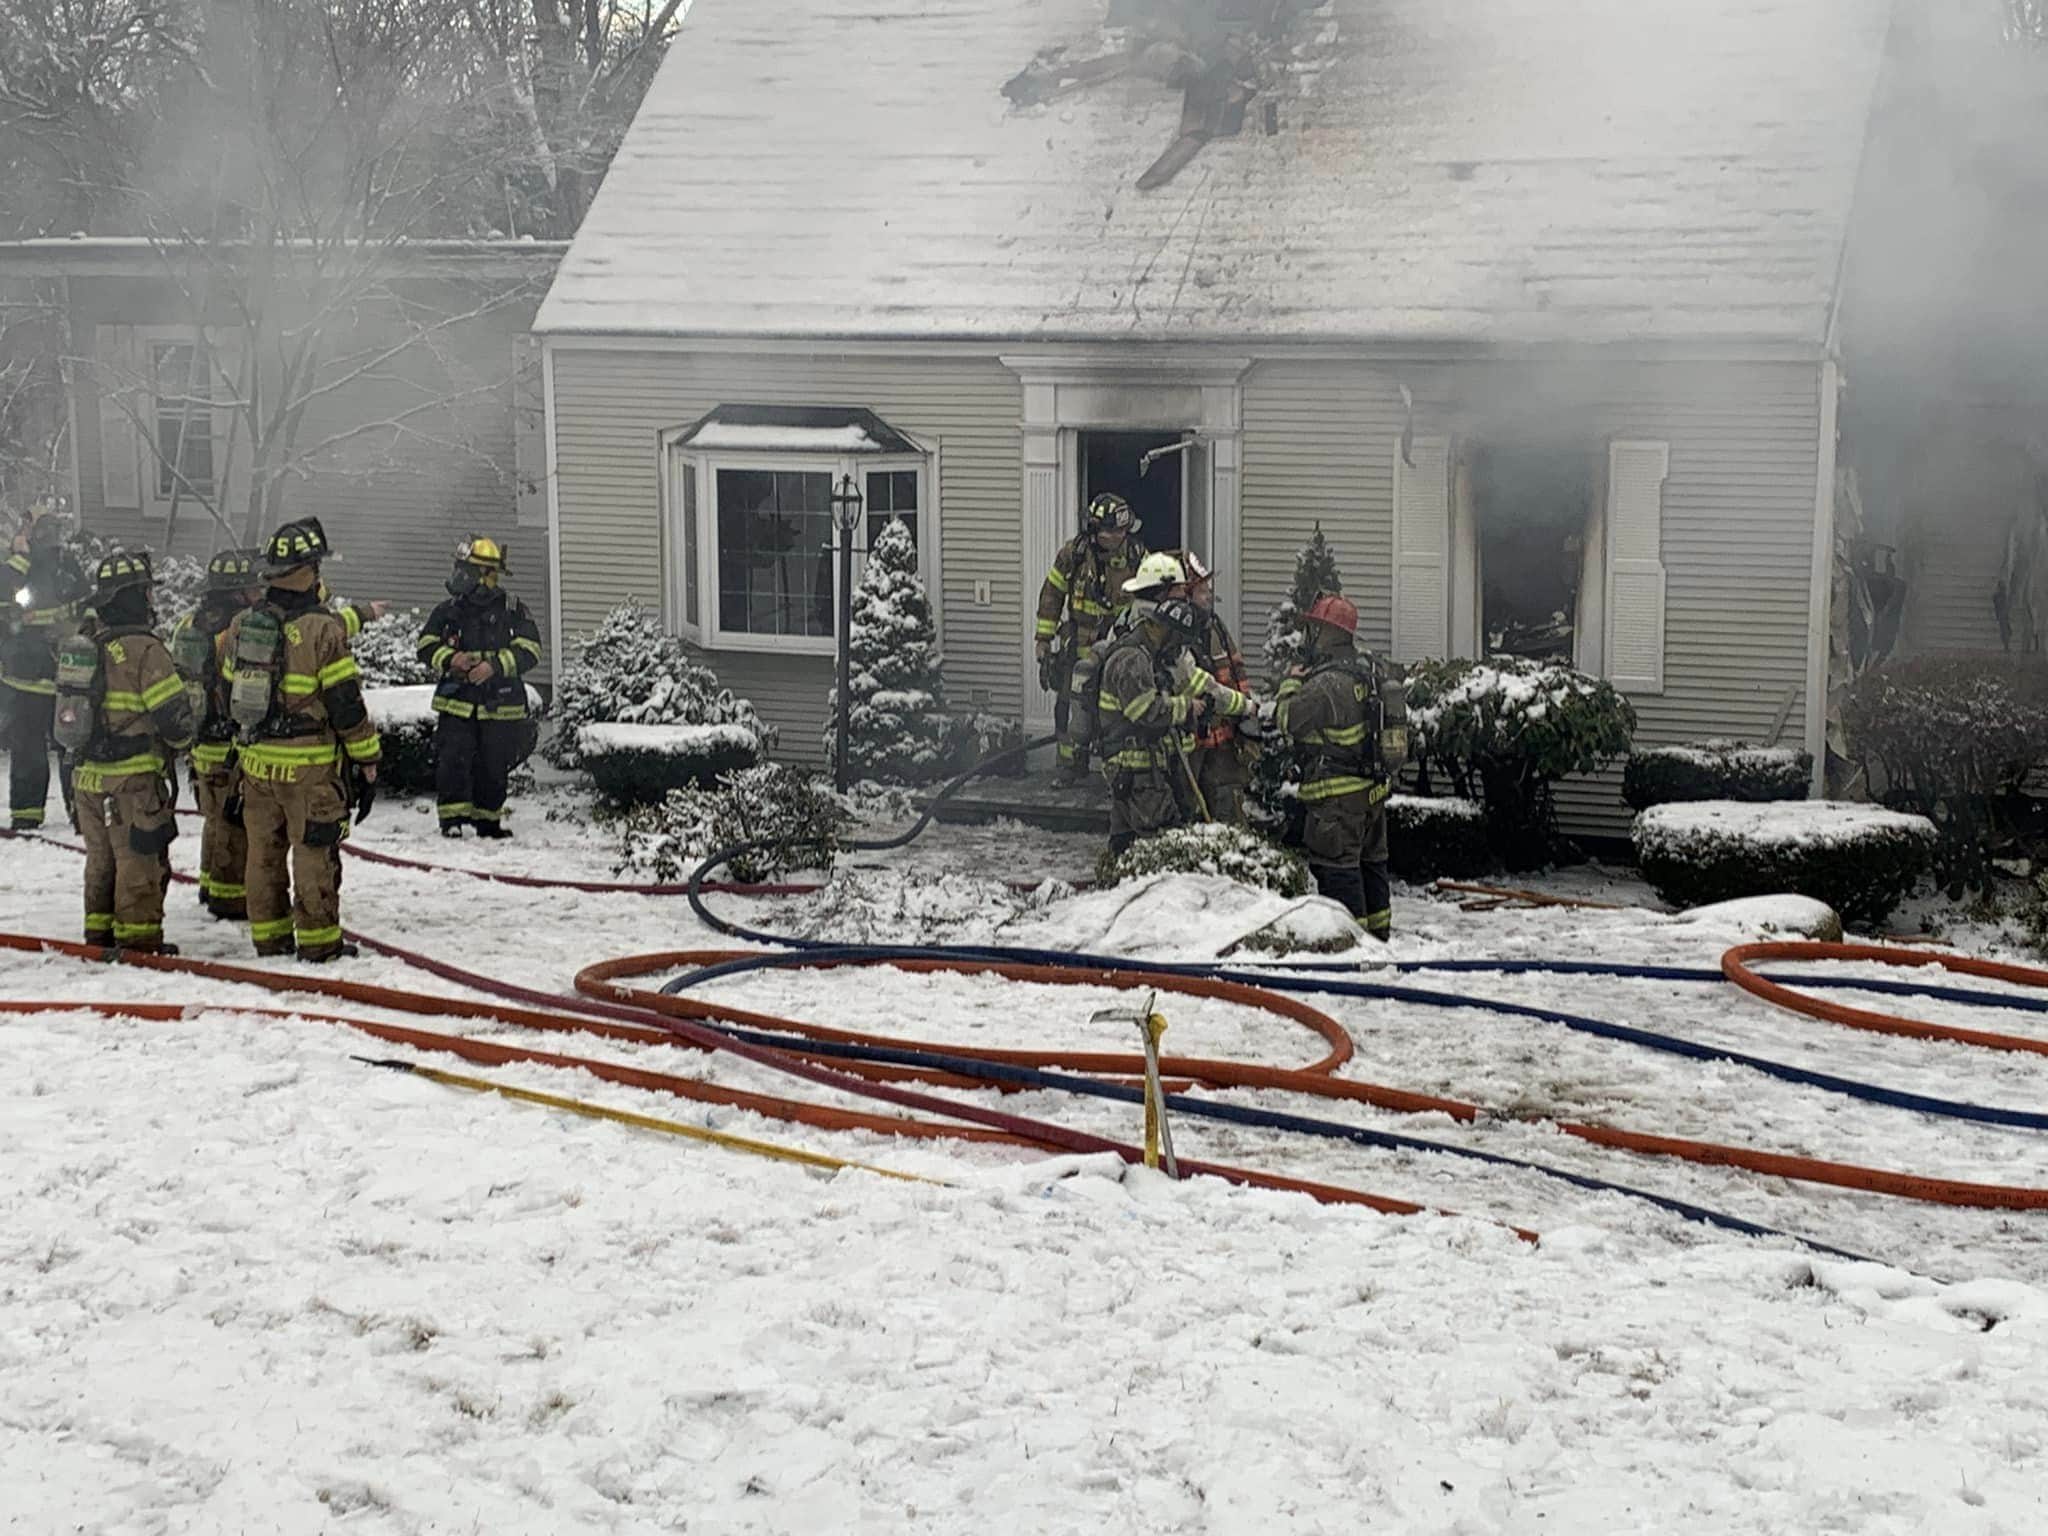 Fire causes $500,000 damage to Westborough house